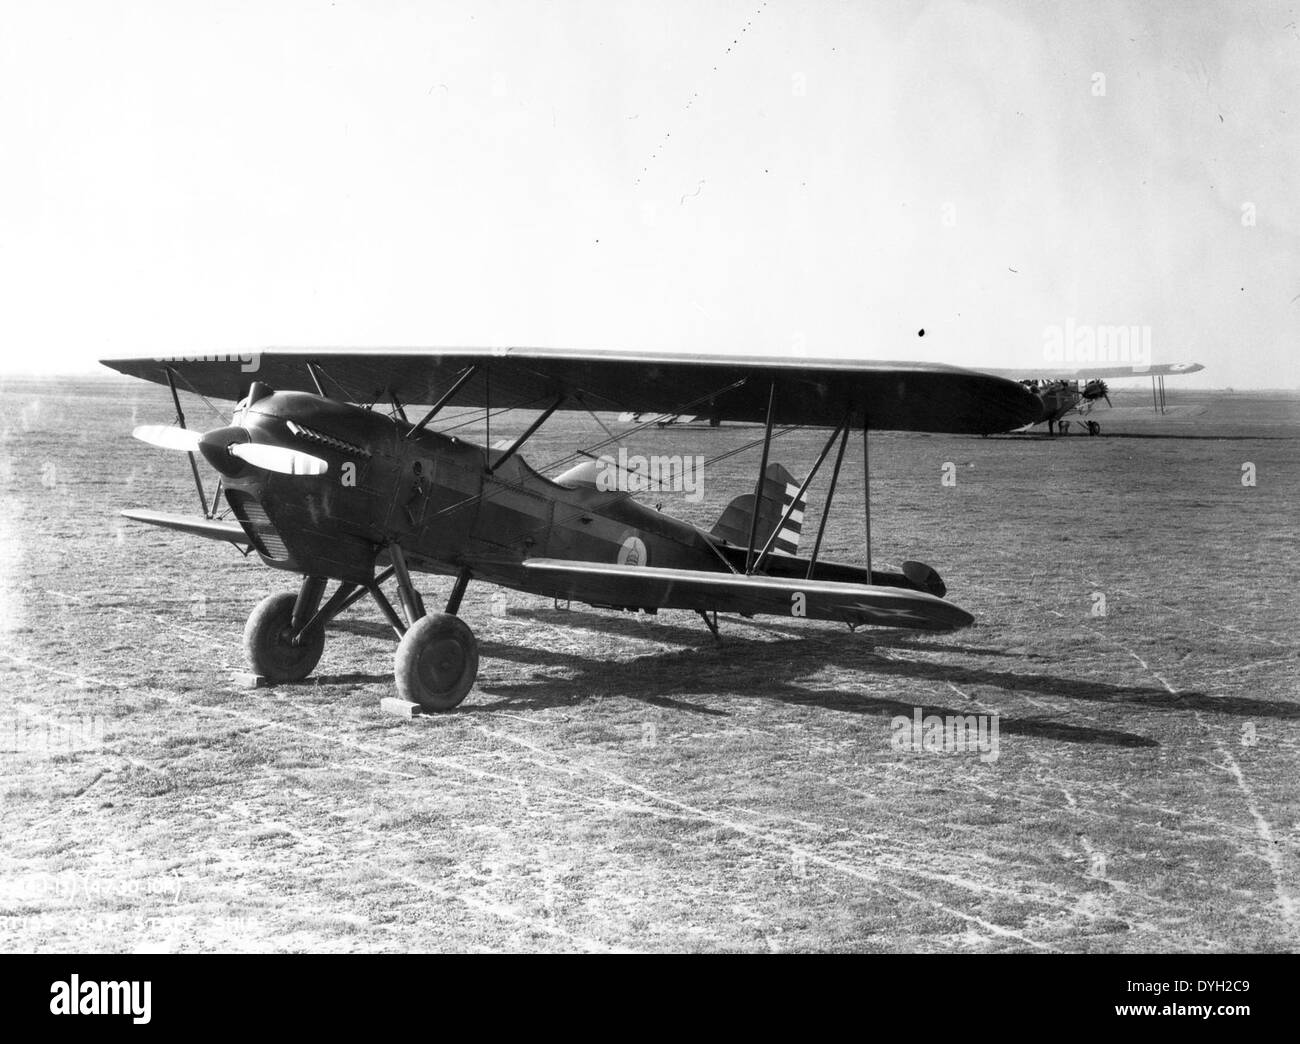 Curtiss A-3 Bolling Field Banque D'Images